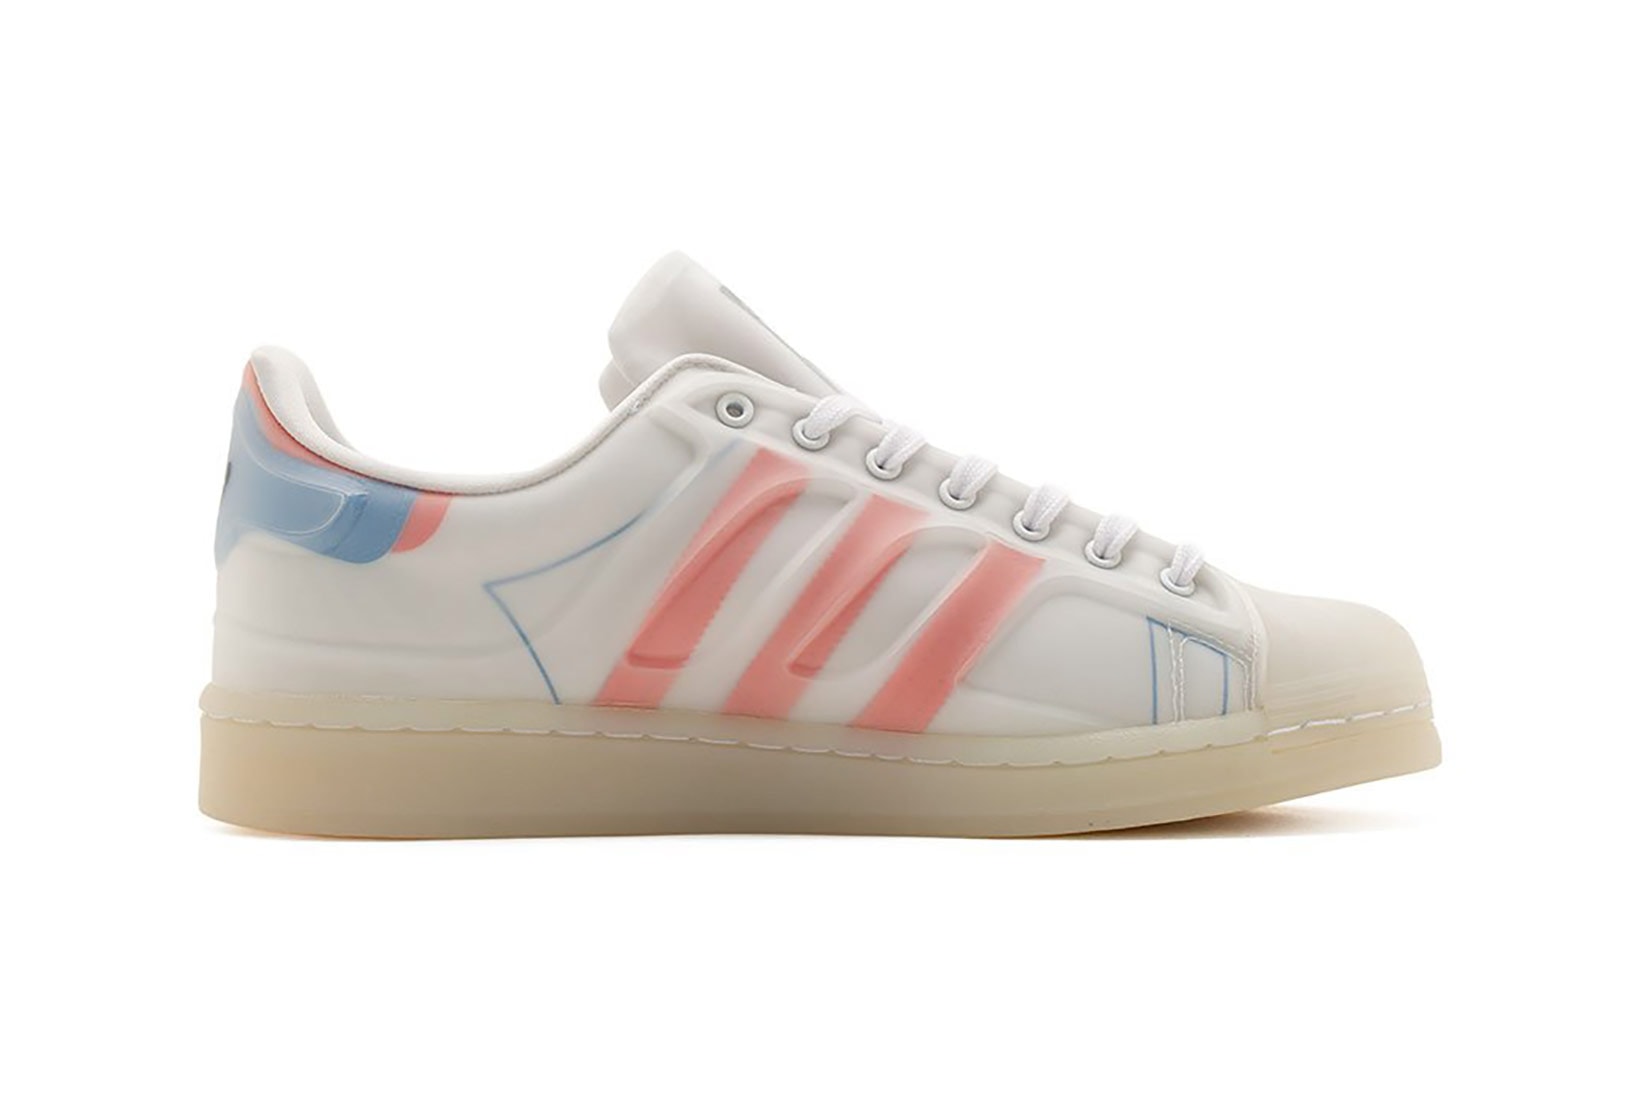 adidas superstar futurshell sneakers white coral pink blue colorway footwear shoes kicks sneakerhead lateral